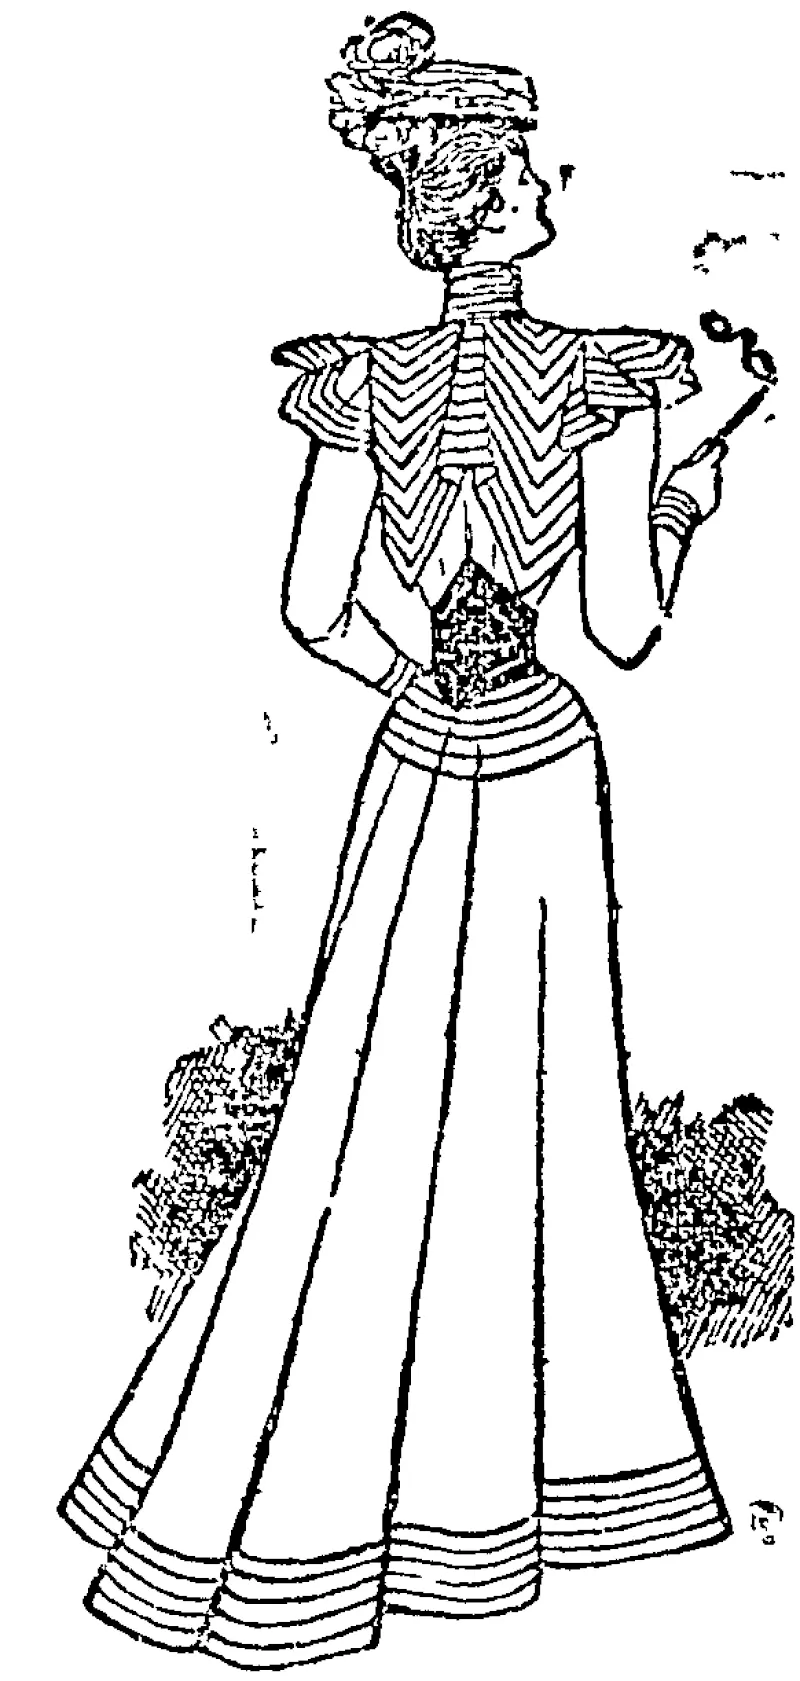 COSTUME OF RESEDA CLOTH AND SATIN BANDS. (Auckland Star, 15 October 1898)